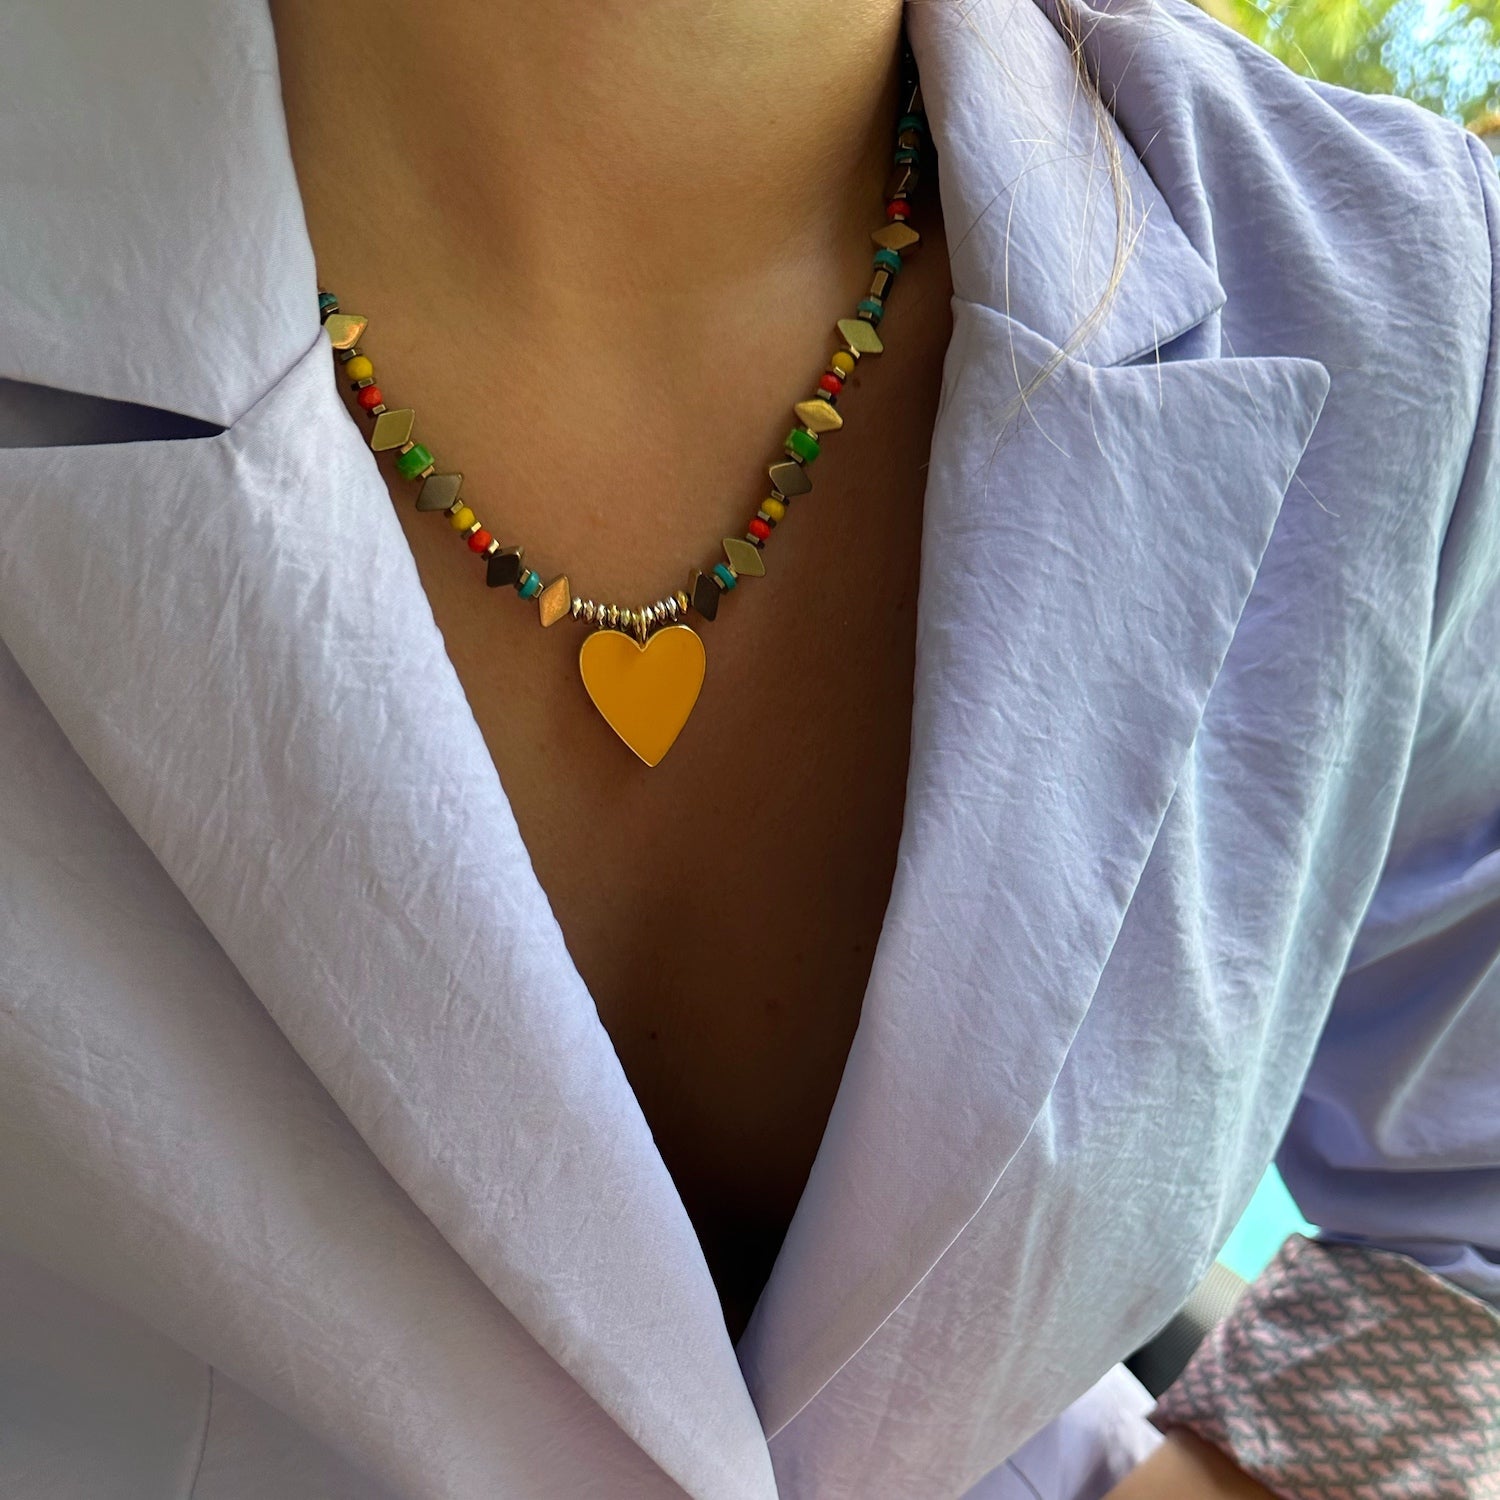 The Joyful Heartbeat Necklace beautifully adorning the neck of a model, bringing a pop of color and radiating positivity.